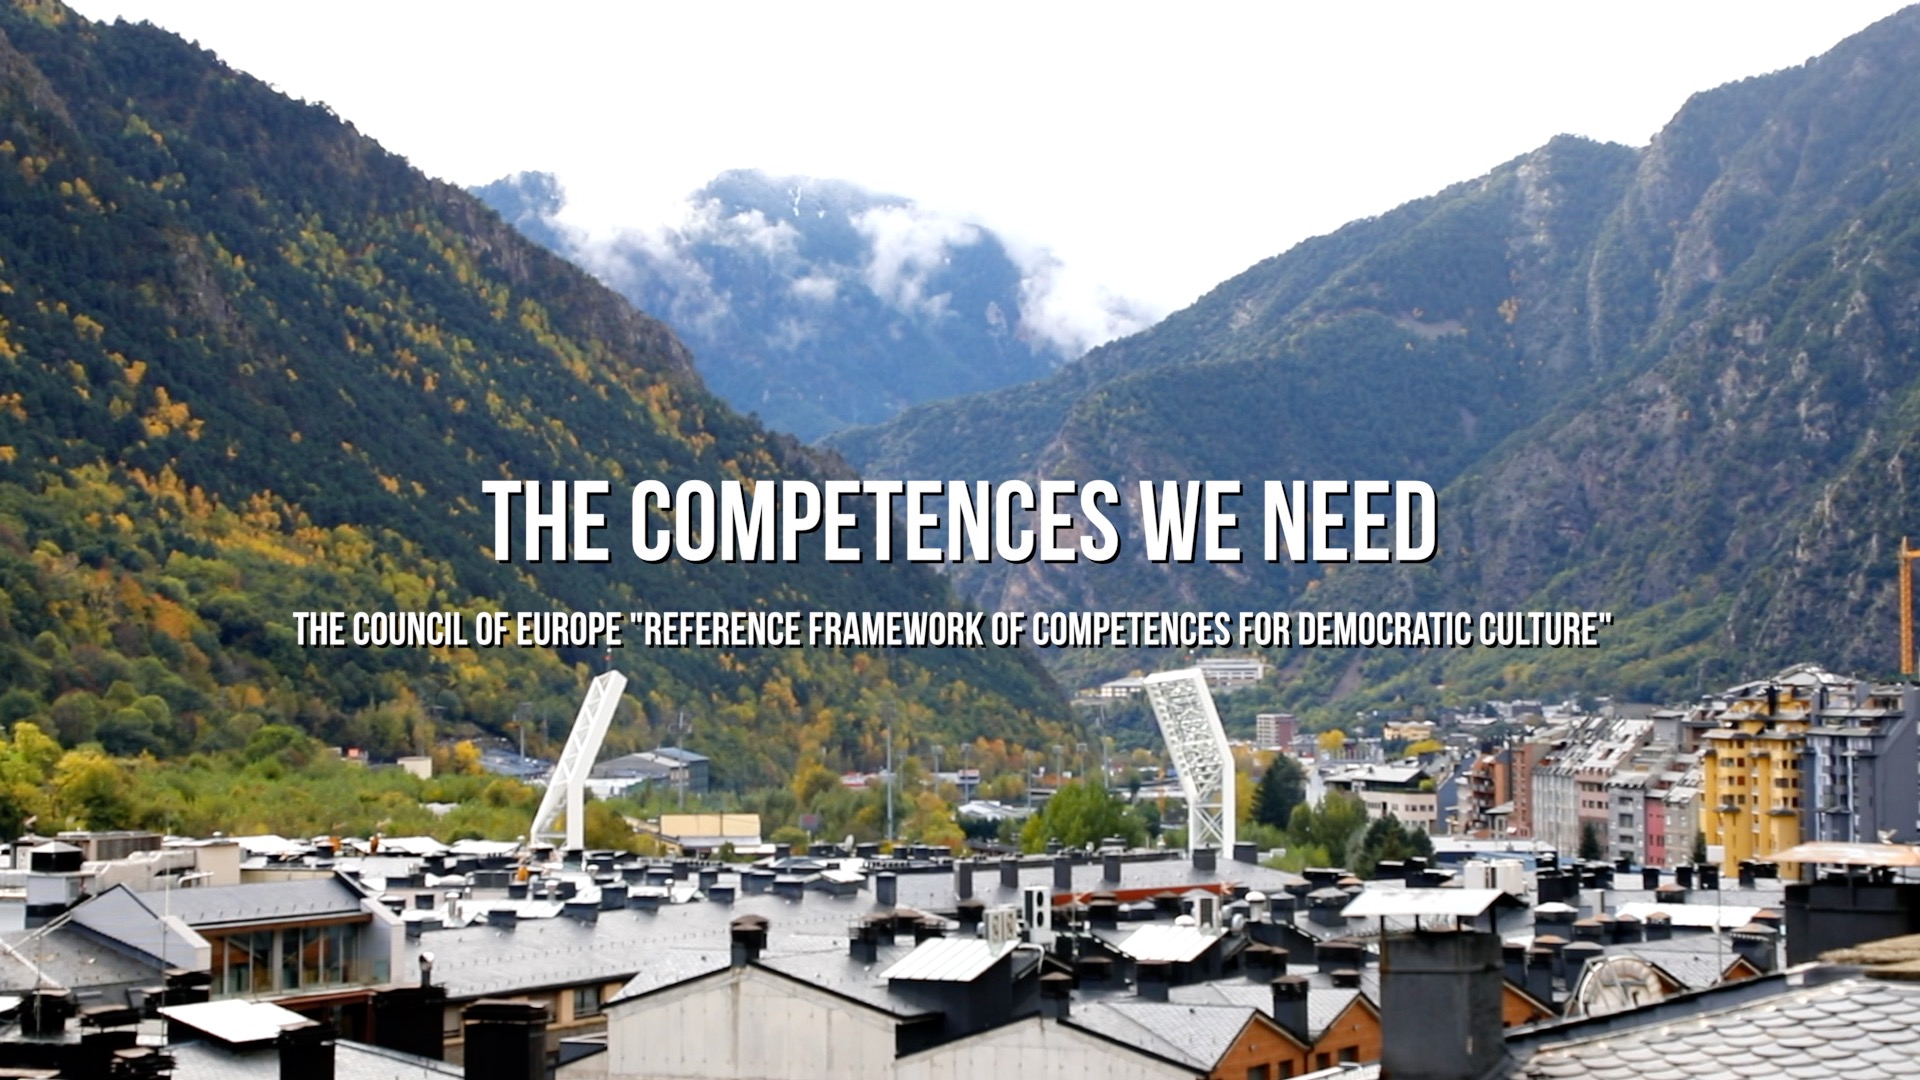 “The Competences we need” - Documentary on the Council of Europe Reference Framework of Competences for Democratic Culture (RFCDC)